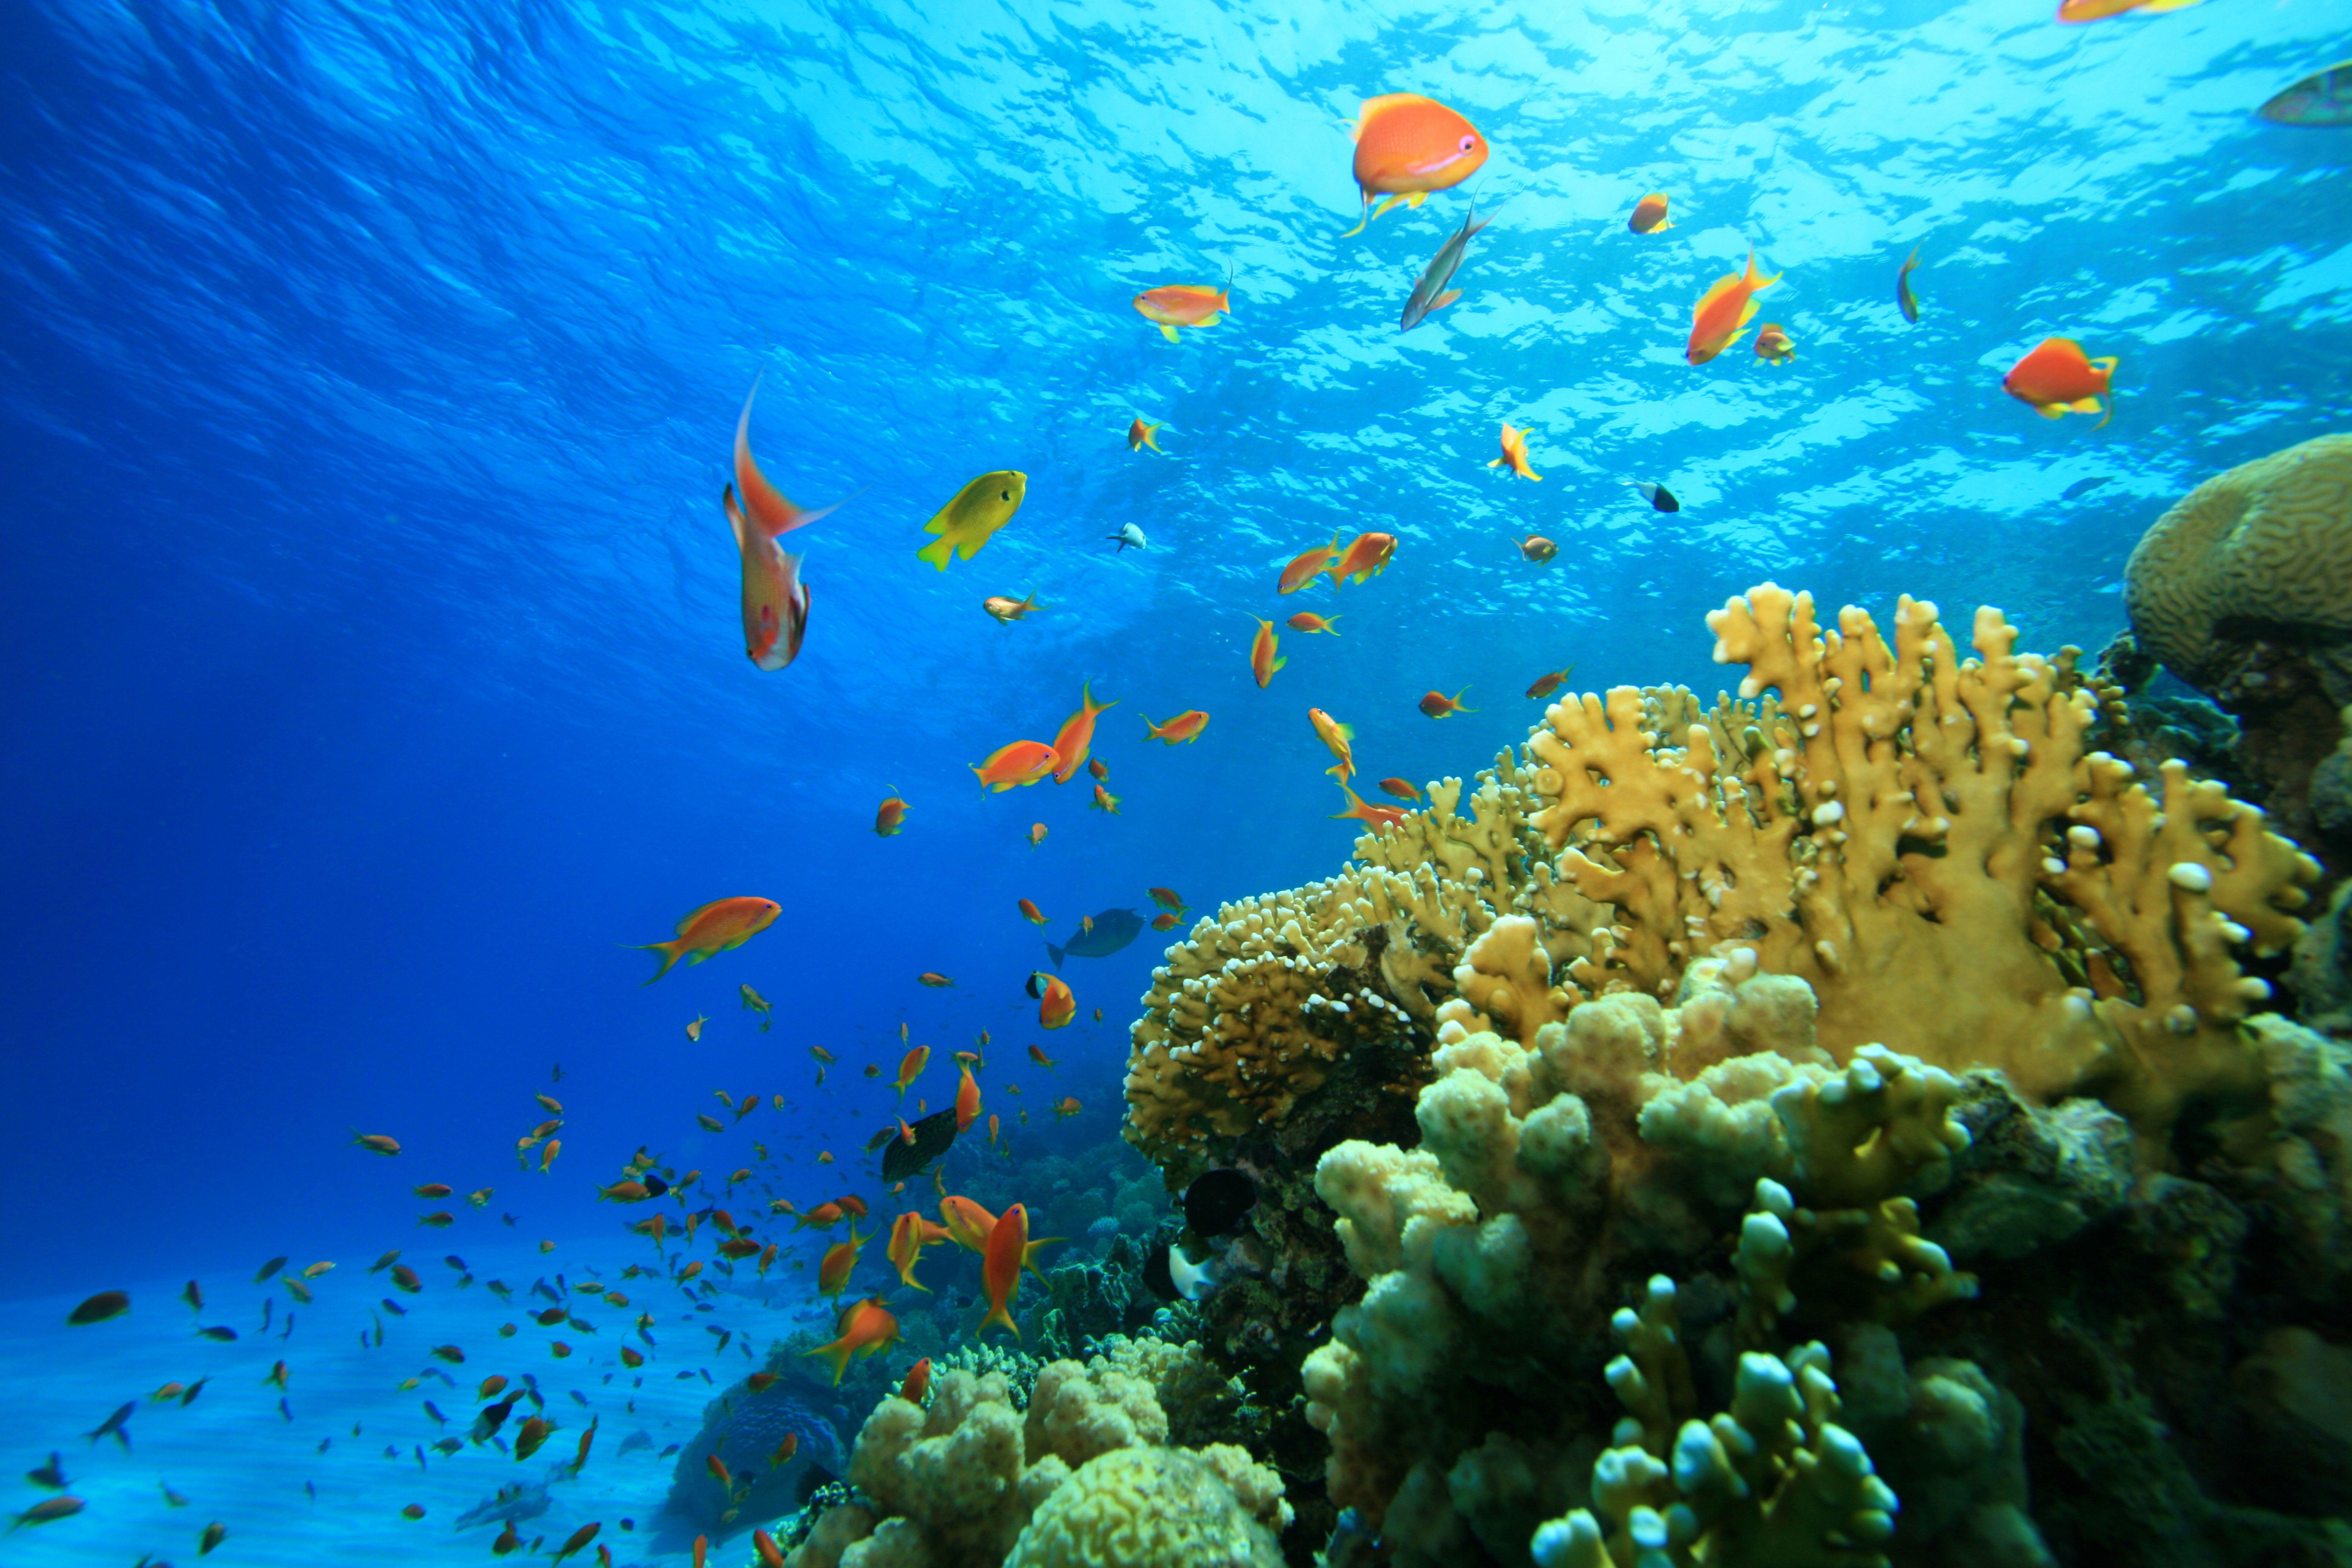 Coral Reef 4K Wallpapers - Top Free Coral Reef 4K Backgrounds ...